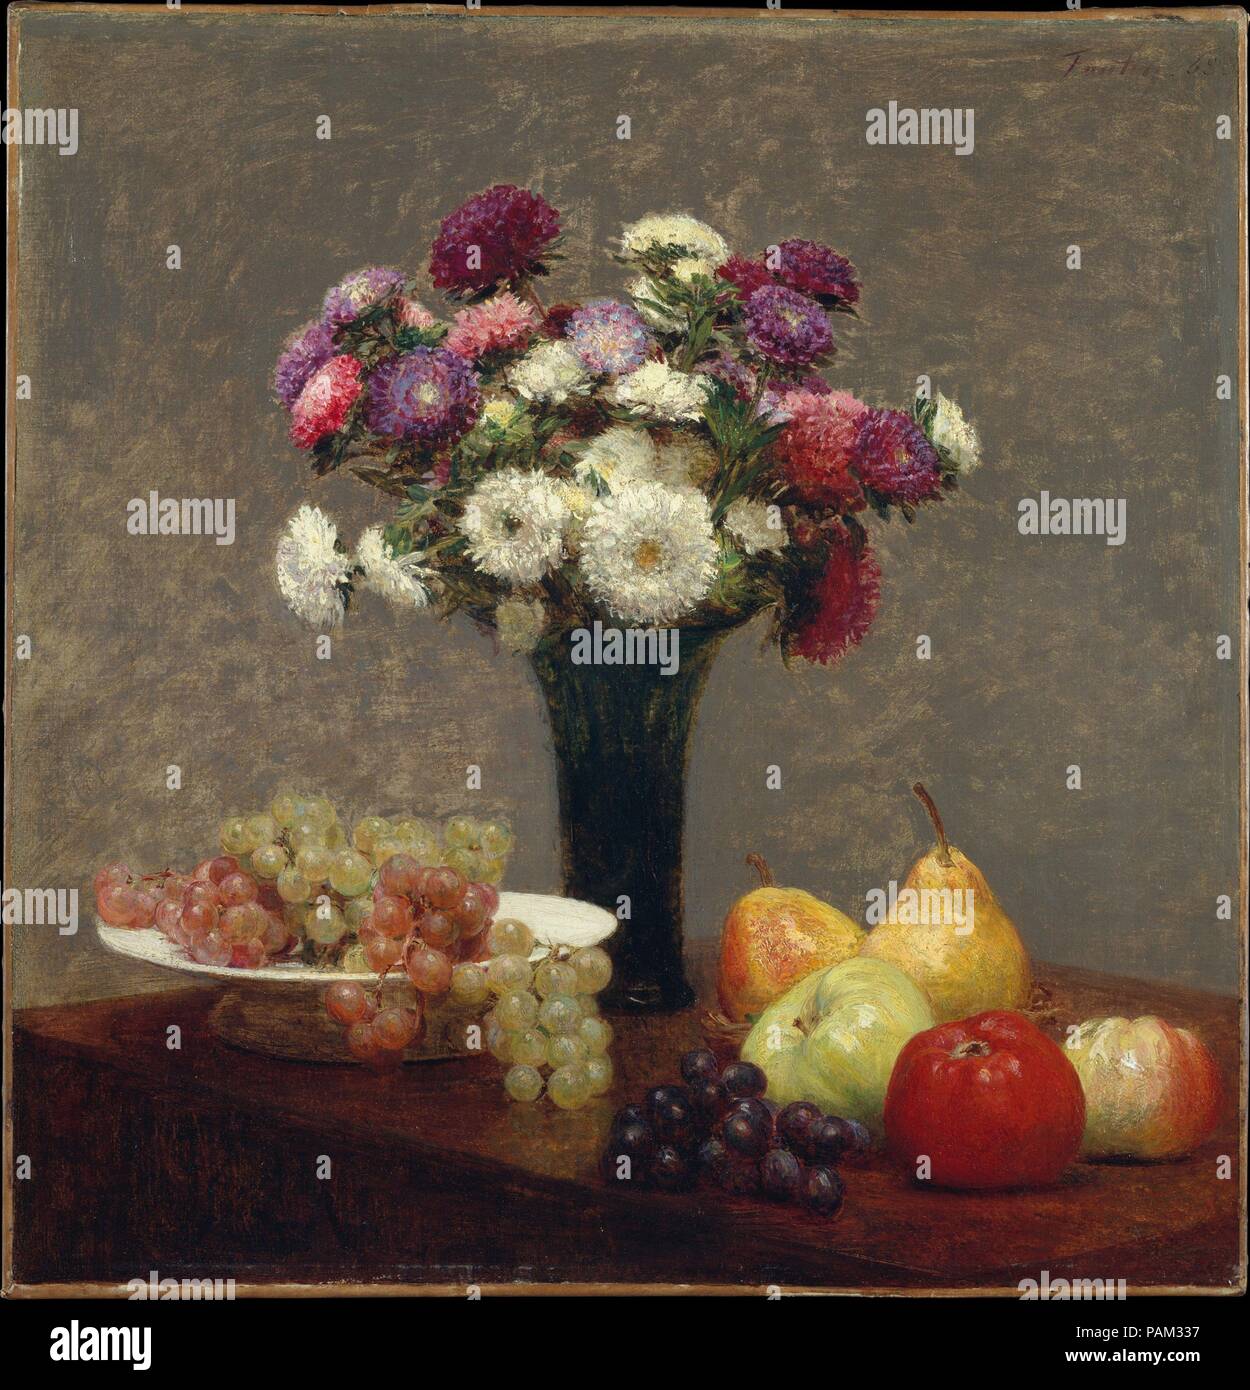 Asters and Fruit on a Table. Artist: Henri Fantin-Latour (French, Grenoble 1836-1904 Buré). Dimensions: 22 3/8 x 21 5/8 in. (56.8 x 54.9 cm). Date: 1868.  Edwin and Ruth Edwards, the English patrons and dealers of Fantin's work, recommended that the artist always use simple vases and plain tabletops in his still lifes in order to show to advantage his great skill in rendering texture and color. Museum: Metropolitan Museum of Art, New York, USA. Stock Photo